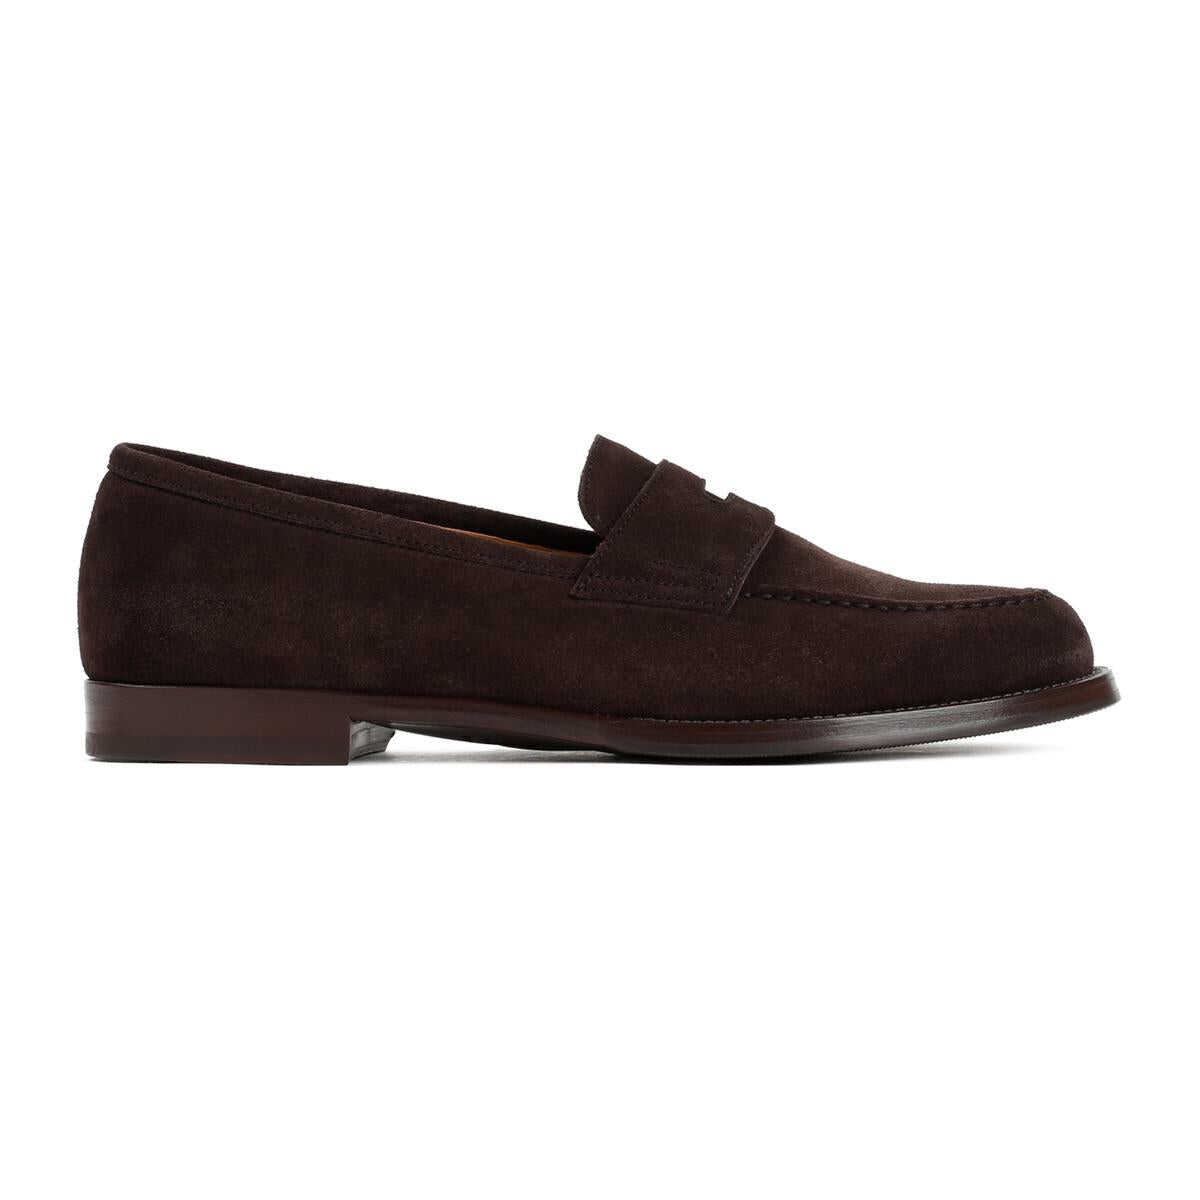 DUNHILL DUNHILL AUDLEY PENNY LEATHER LOAFERS SHOES BROWN